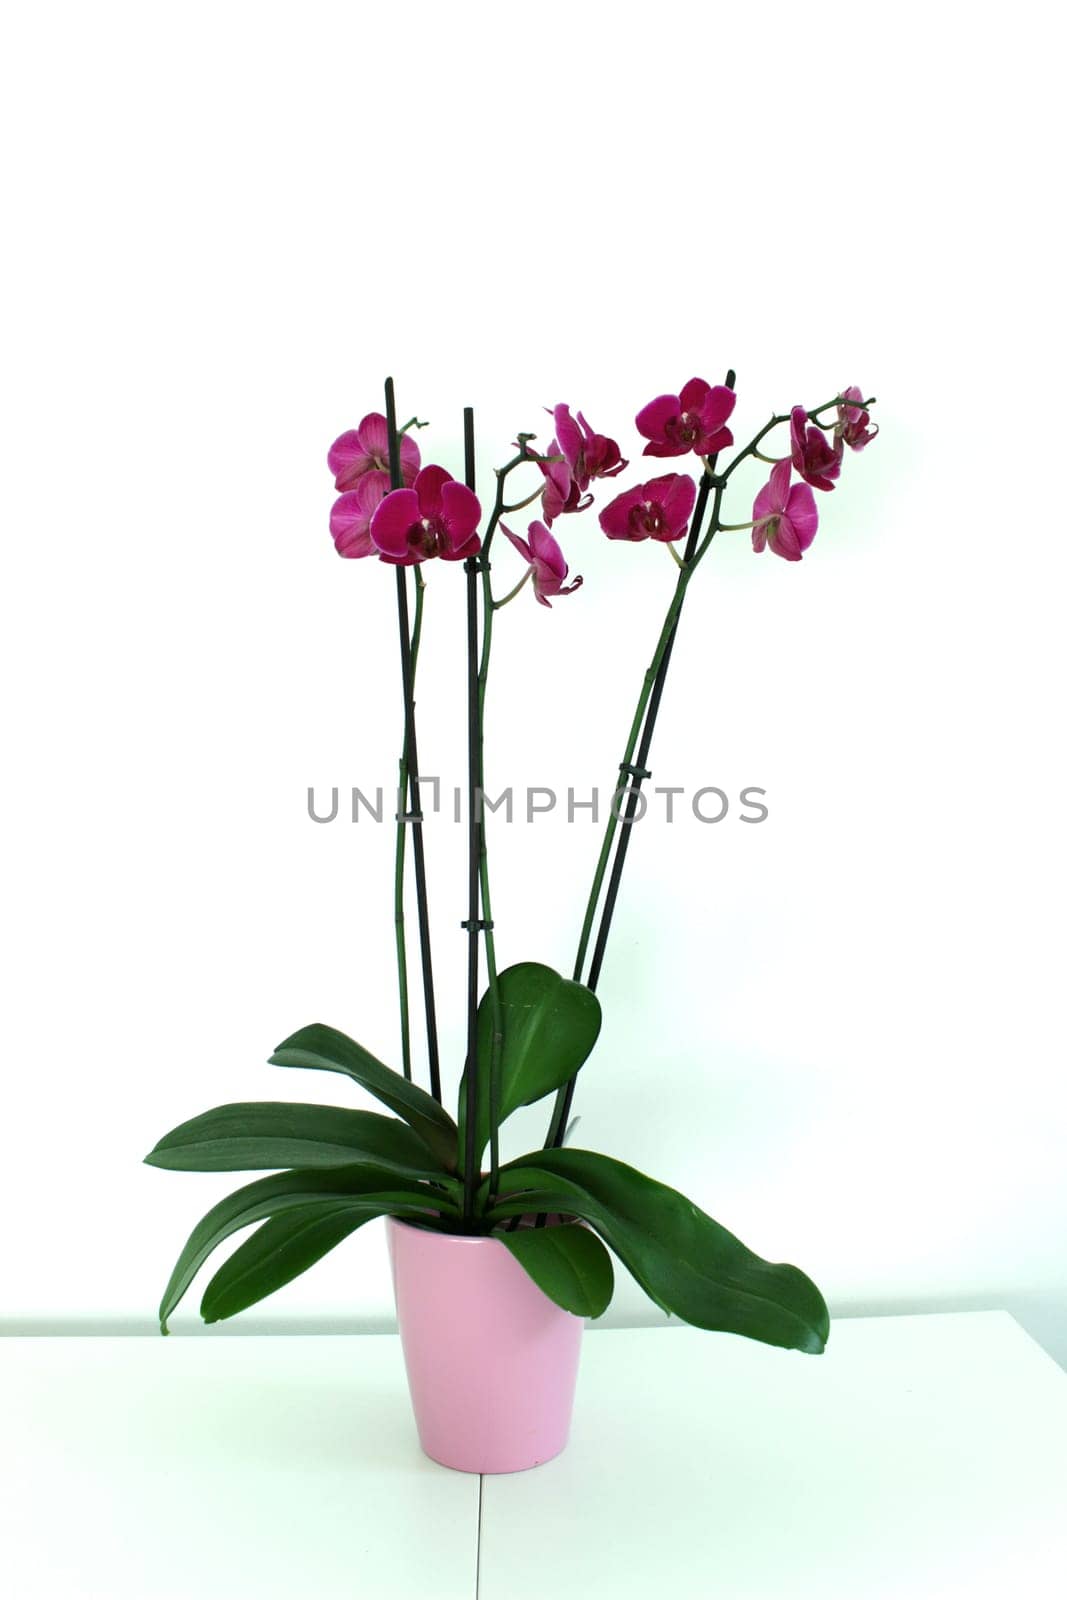 There is a vase of an orchid with burgundy flowers on a white table by MilaLazo